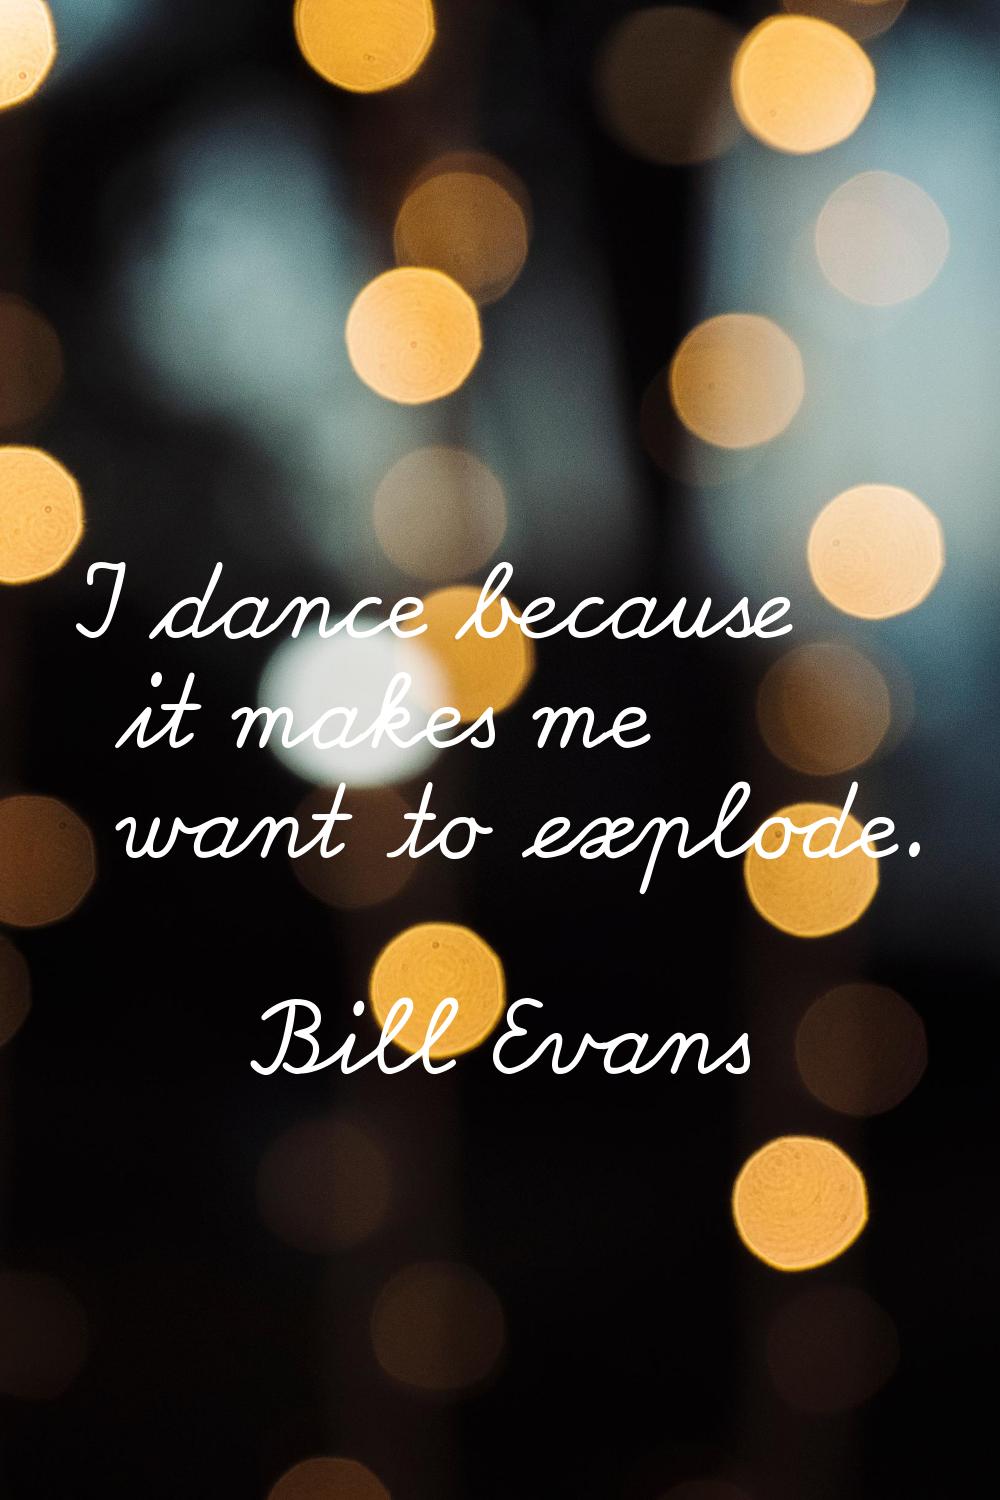 I dance because it makes me want to explode.